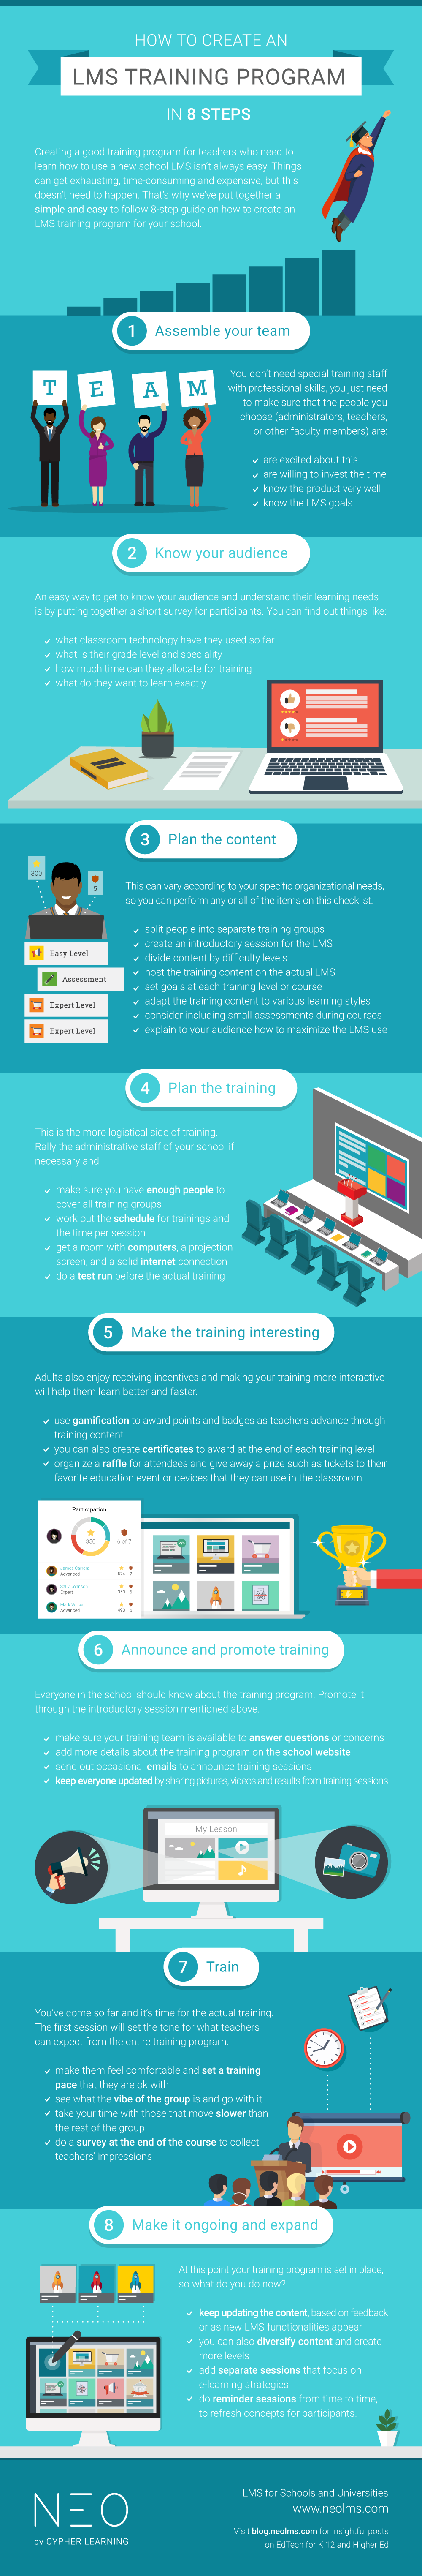 How to Create an LMS Training Program in 8 Steps